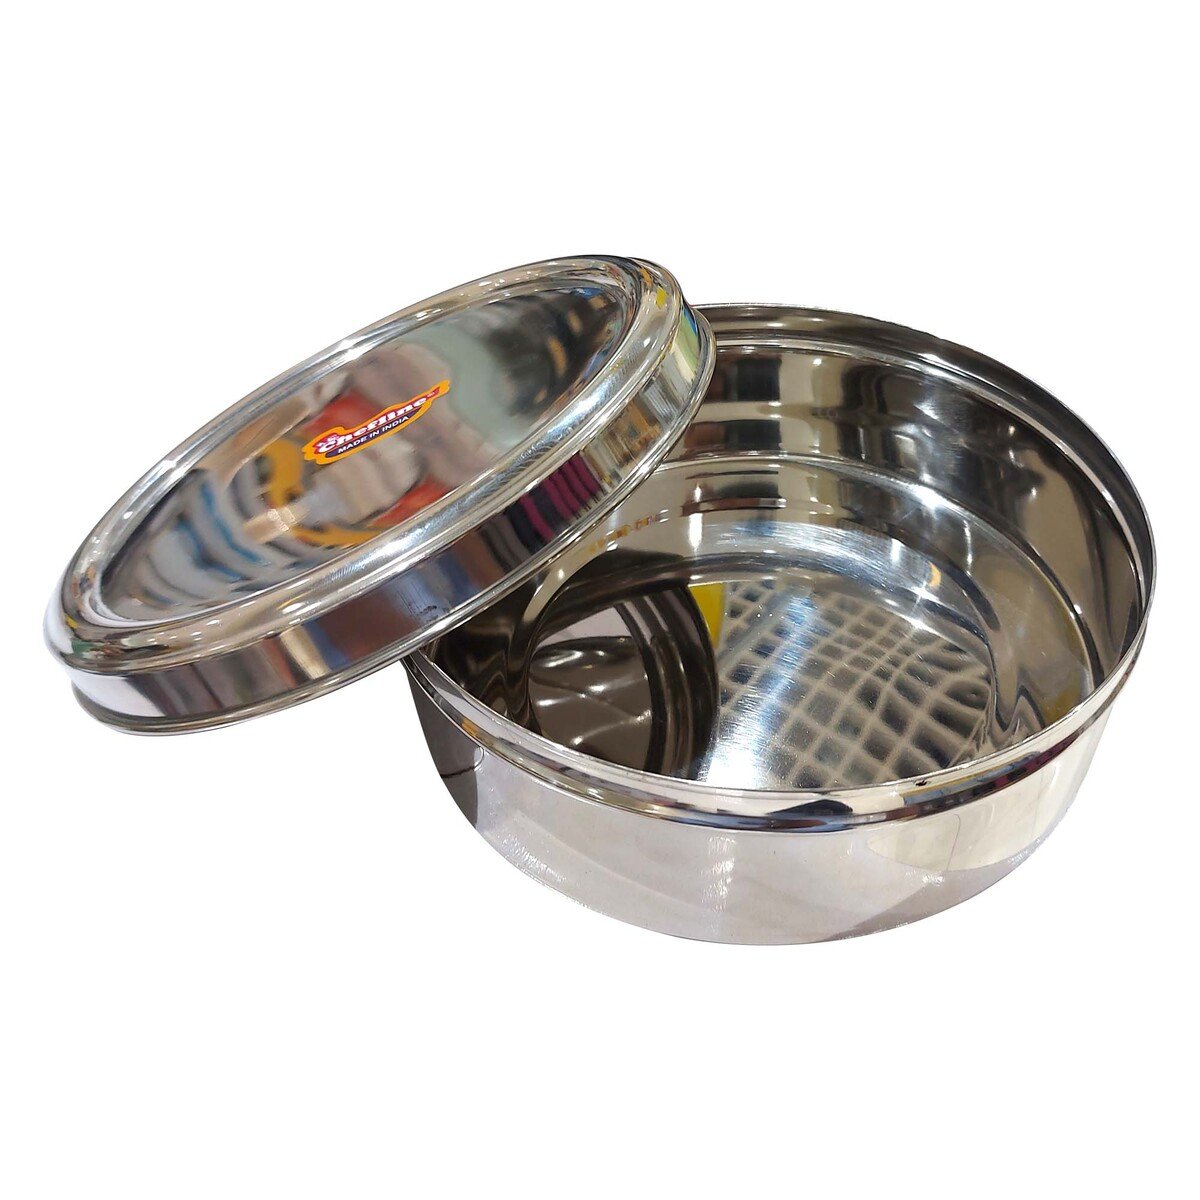 Chefline Stainless Steel Lunch Box Round Small S2 India